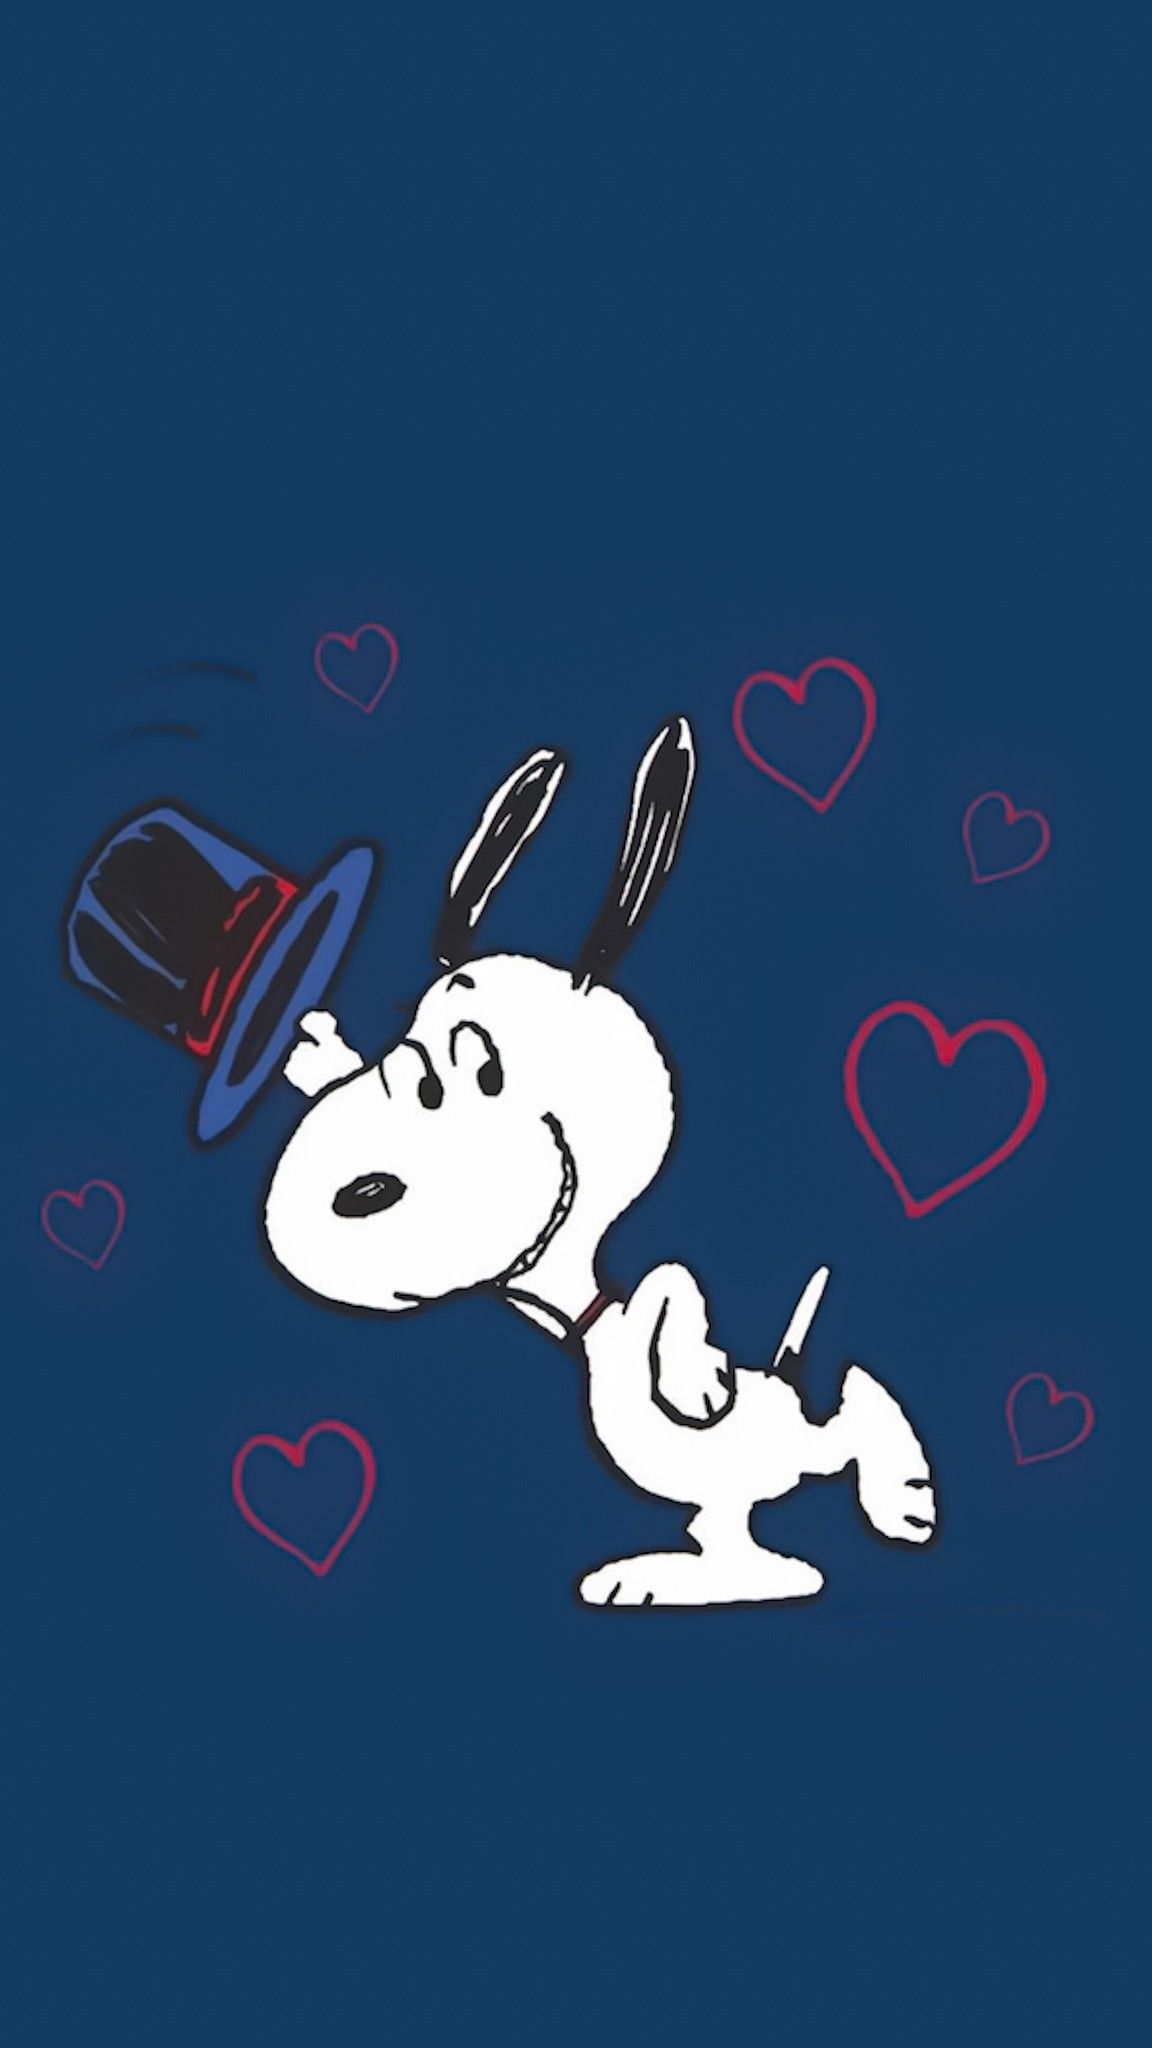 Snoopy. Snoopy picture, Snoopy wallpaper, Funny wallpaper